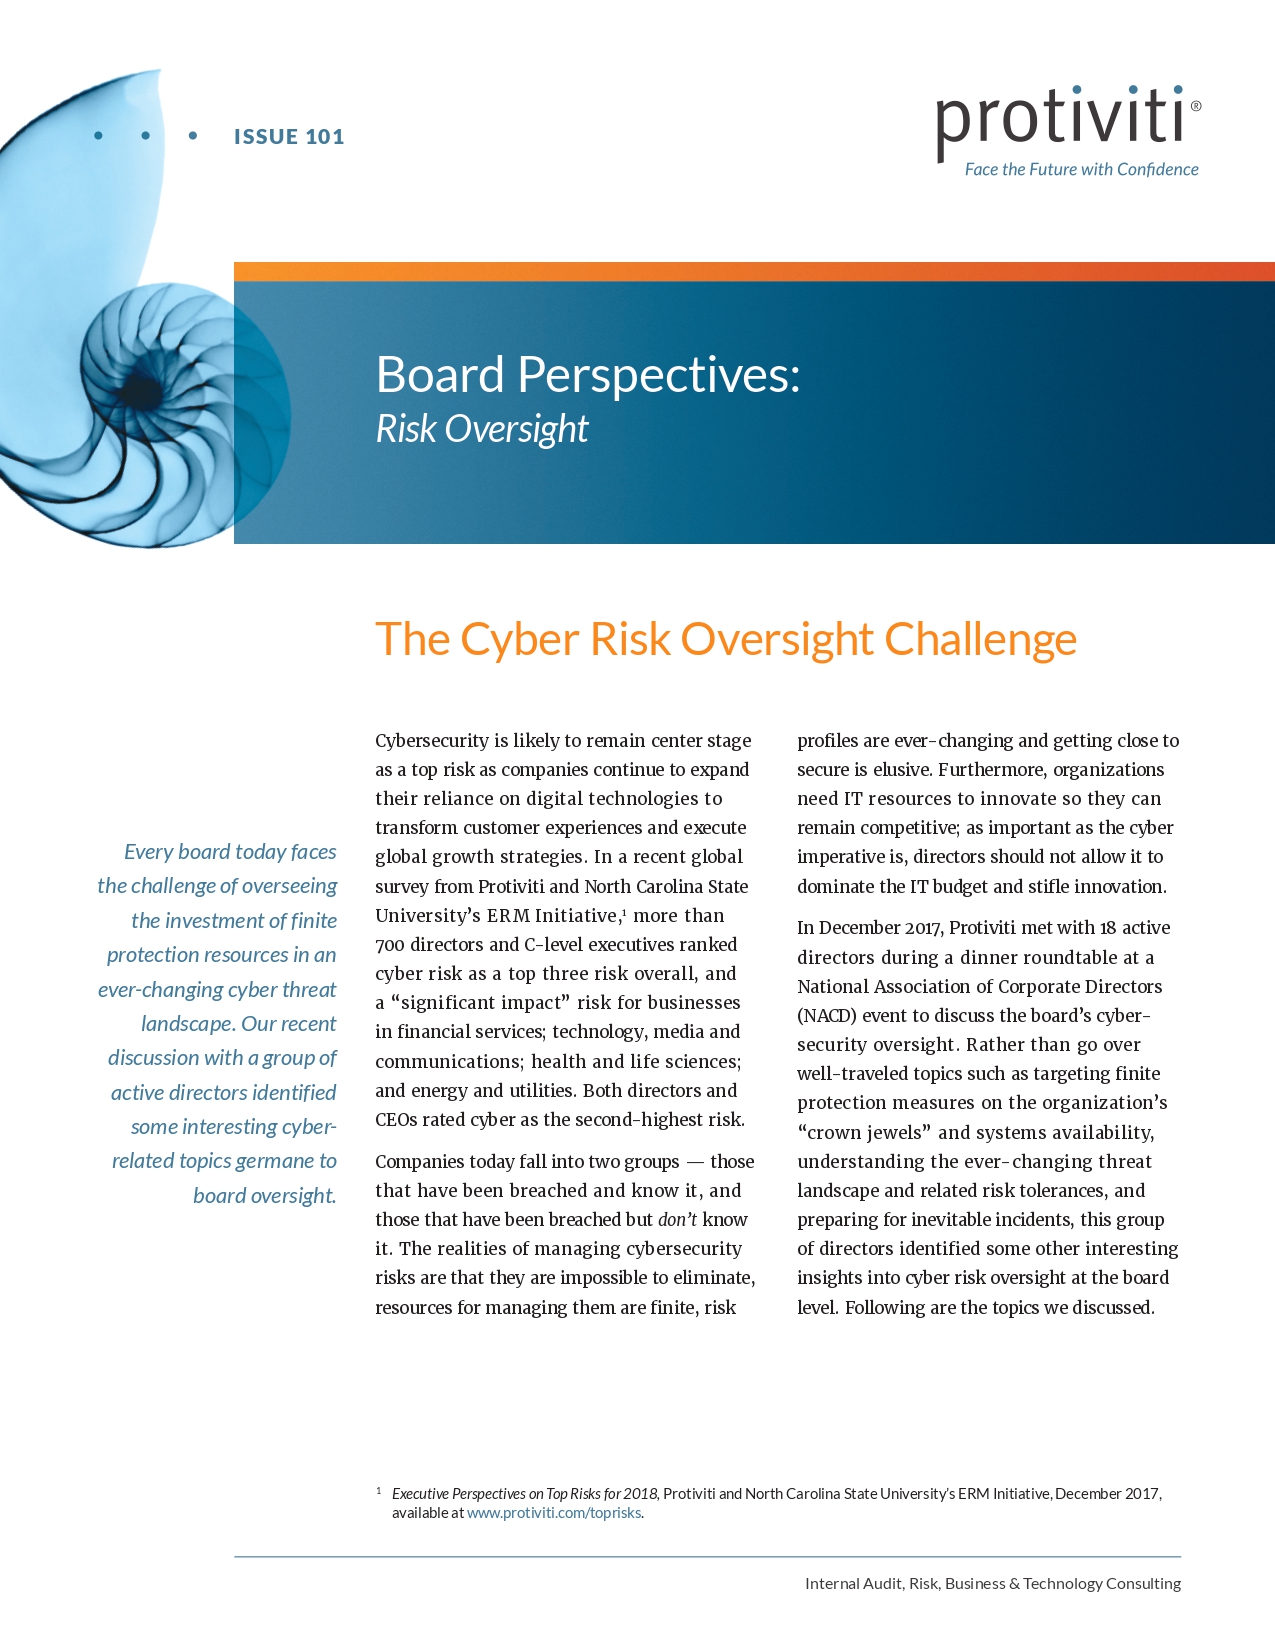 Screenshot of the first page of The Cyber Risk Oversight Challenge - Board Perspectives - Risk Oversight, Issue 101